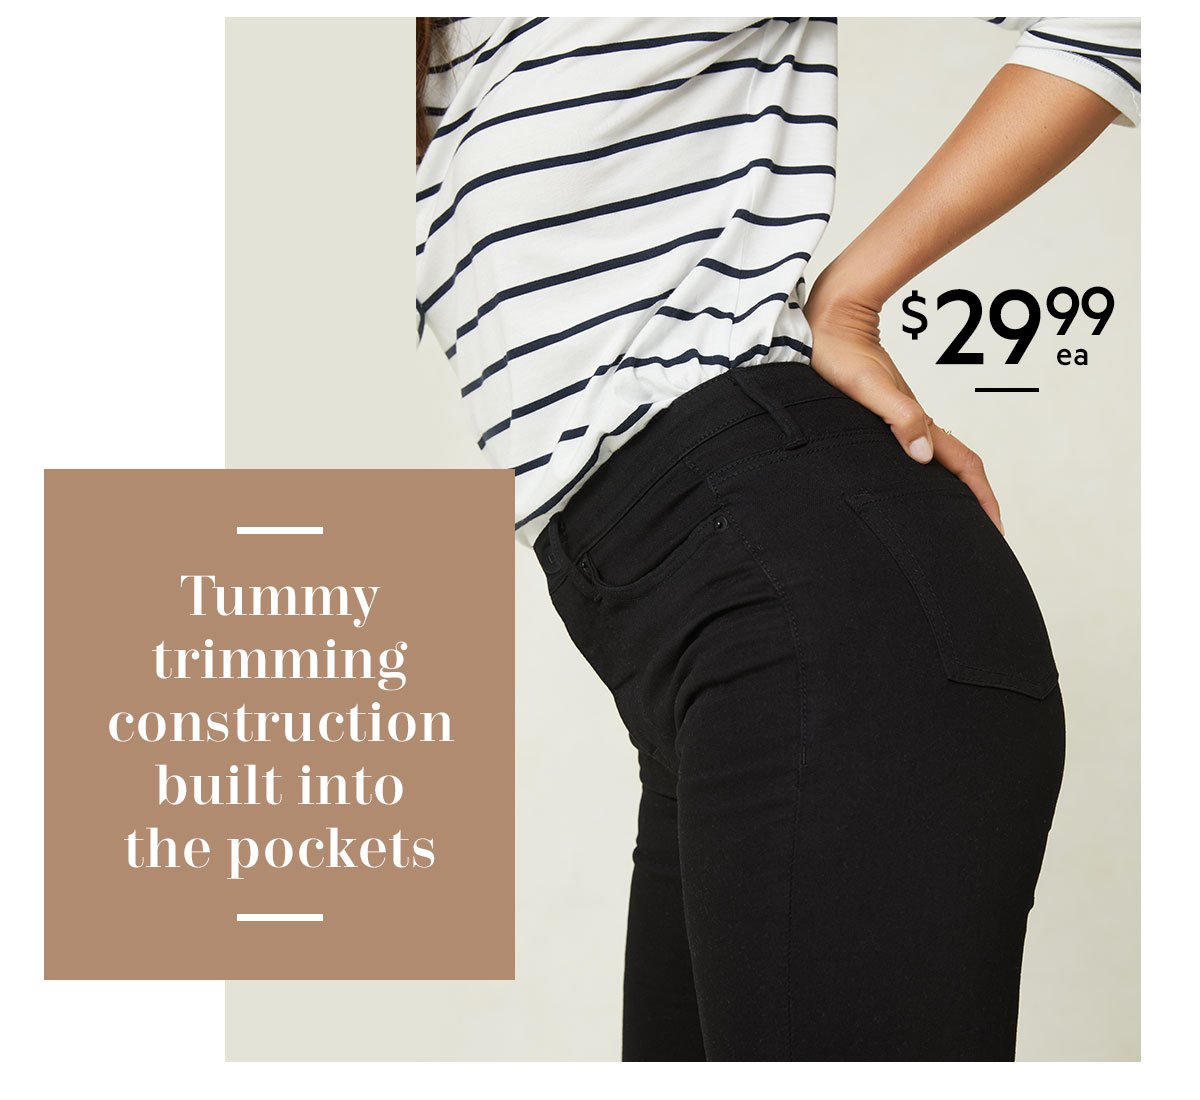 TUMMY TRIMMING CONSTRUCTION BUILT INTO THE POCKETS